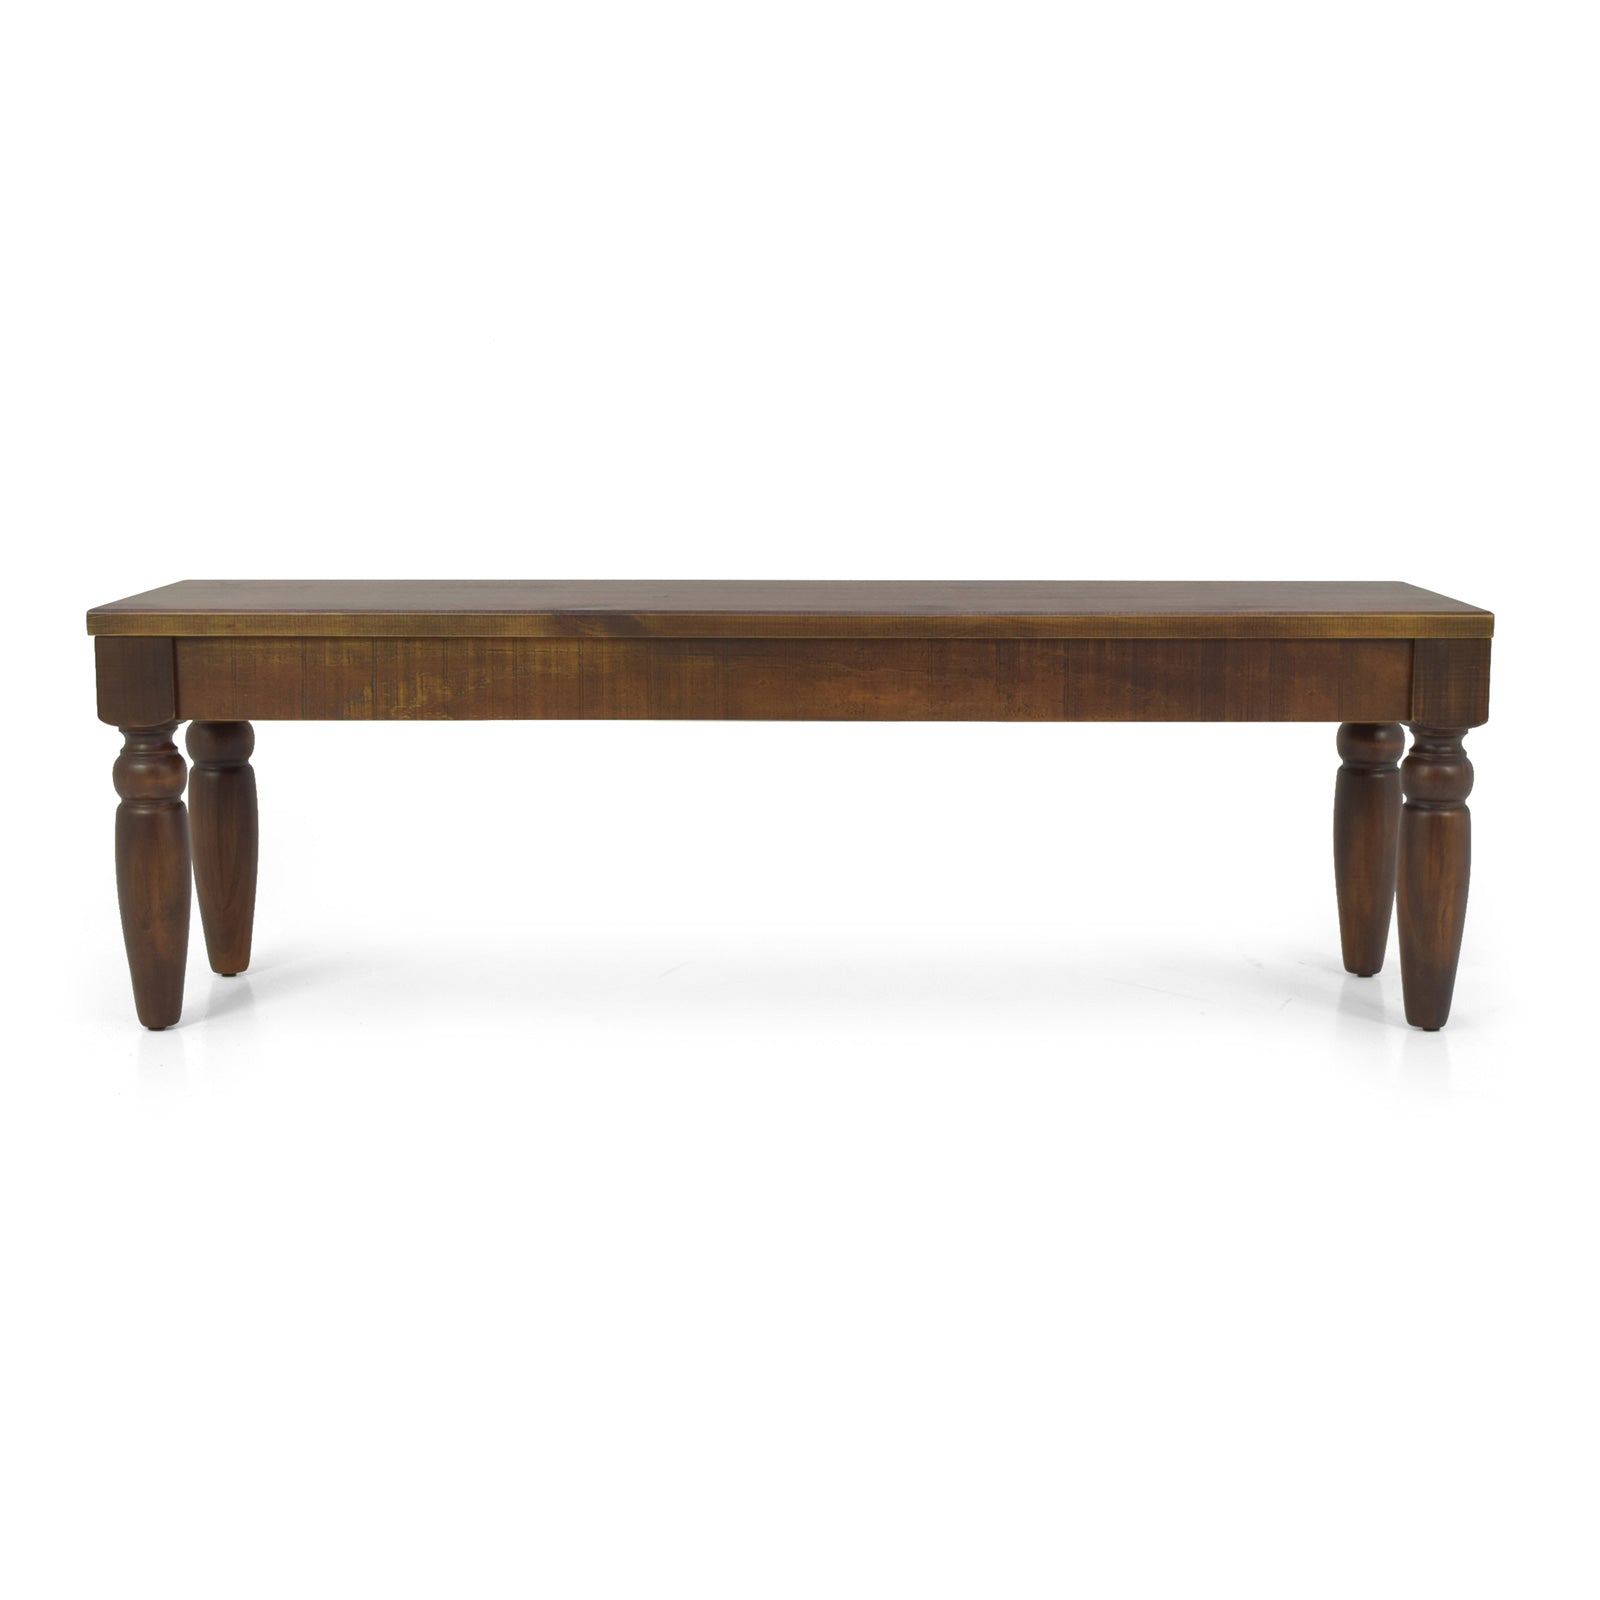 Solid Wood Bench 55" With Turned Legs  